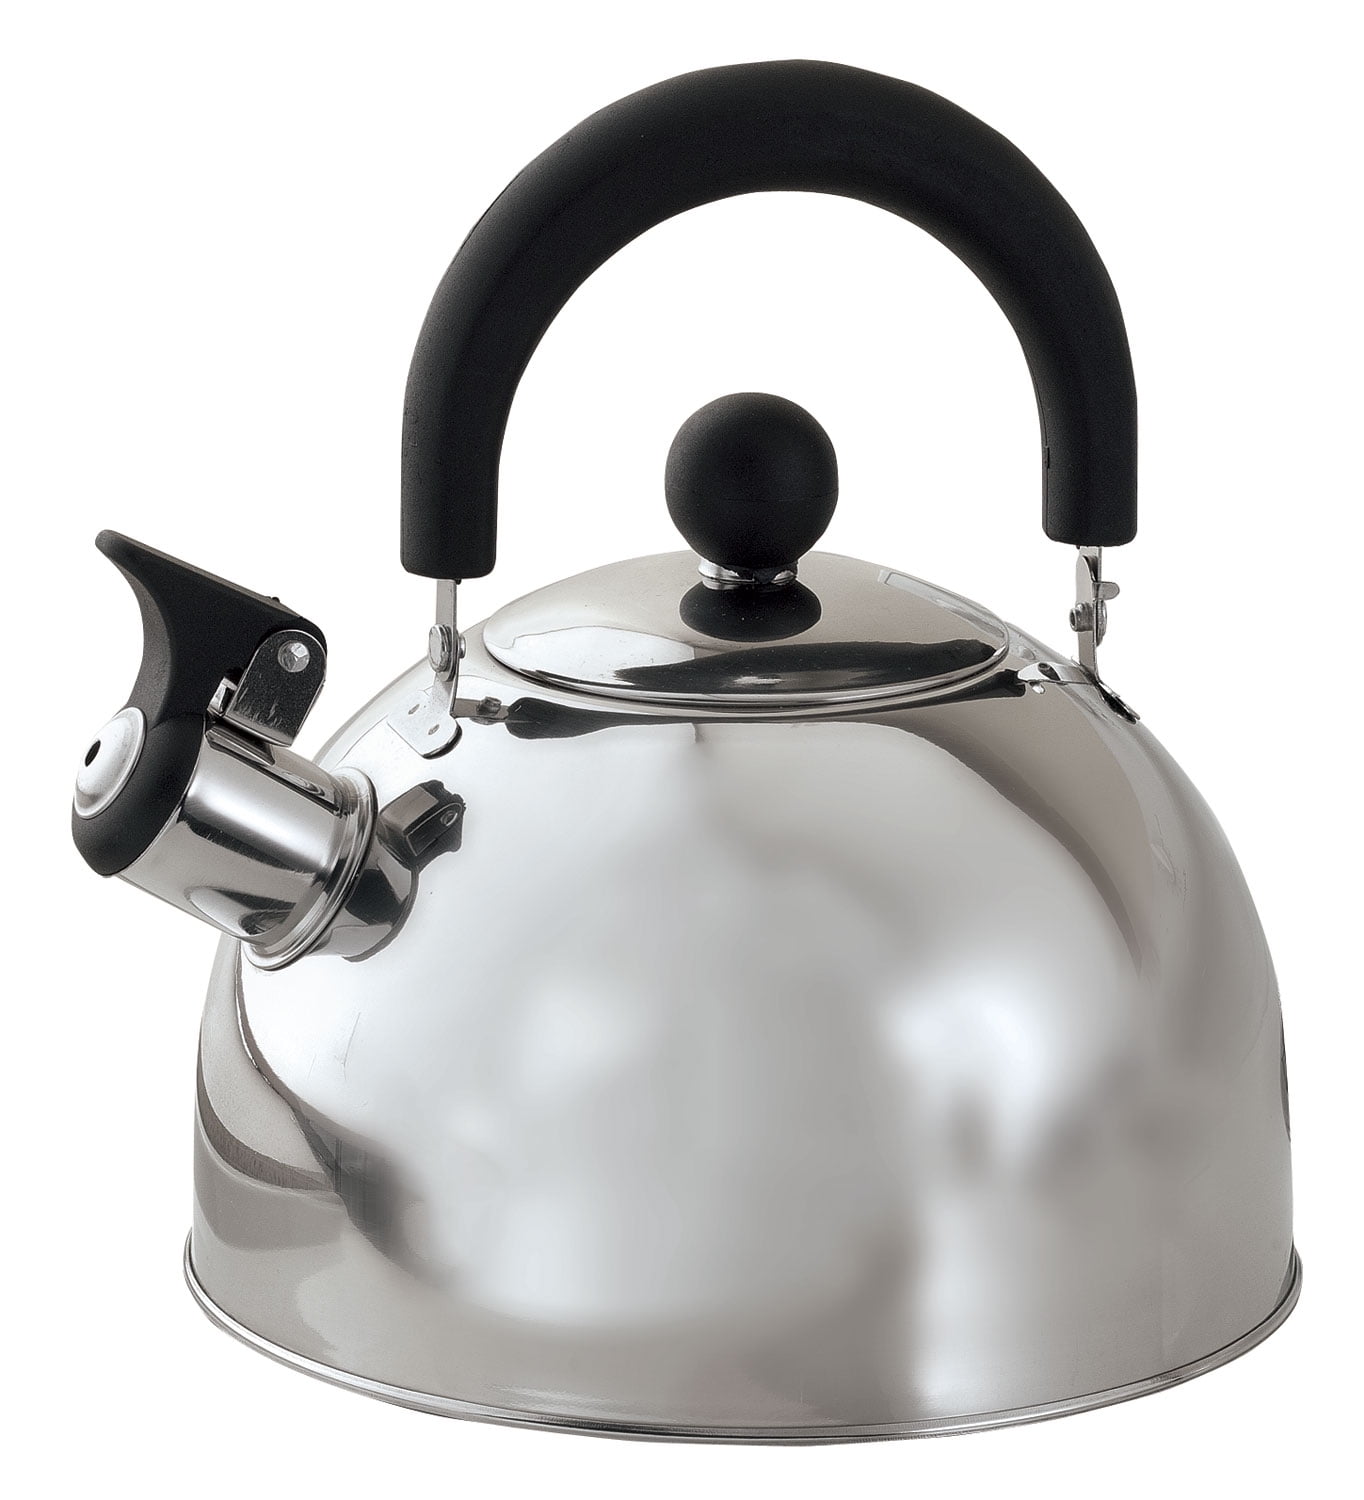 Stainless Steel Whistling Tea Kettle, Made of 100% Durable Stainless Steel,  Flip Top Spout, Light Handle – Holds 2 Quarts, by Home-Style Kitchen 